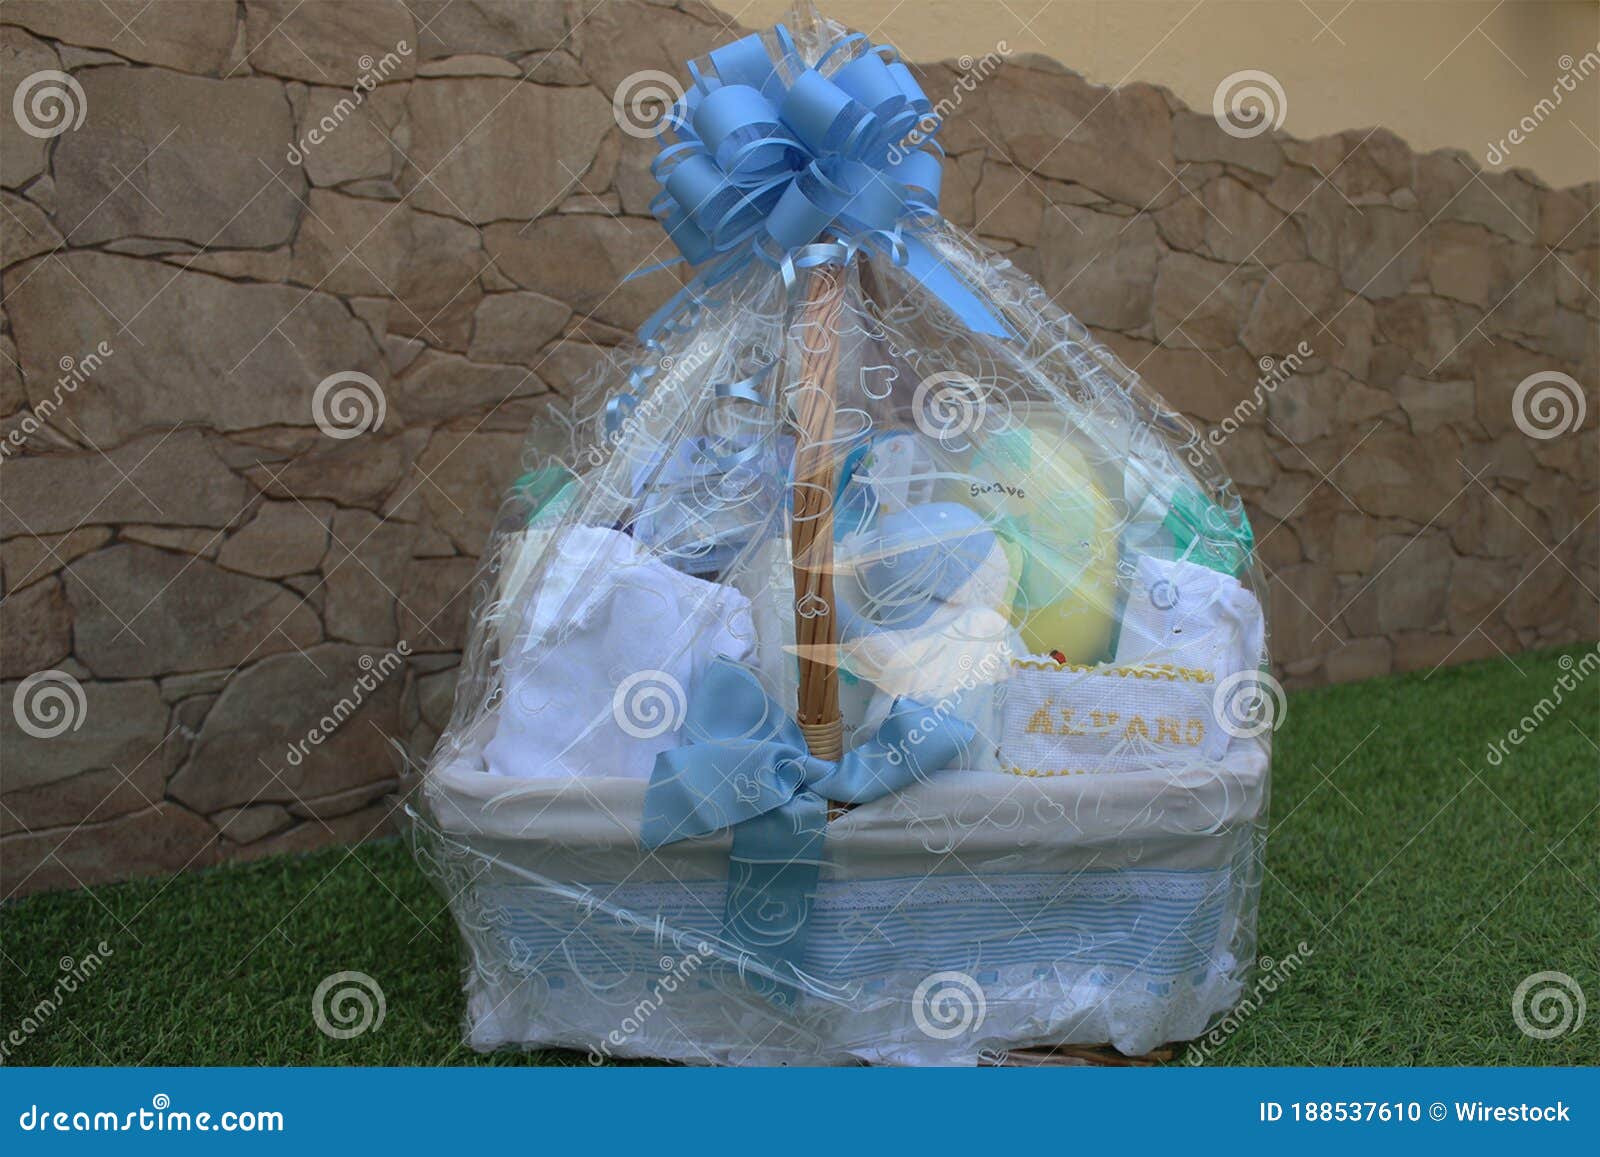 baby cradle wrapped in a plastic gift bag with a nametag alvaro on it